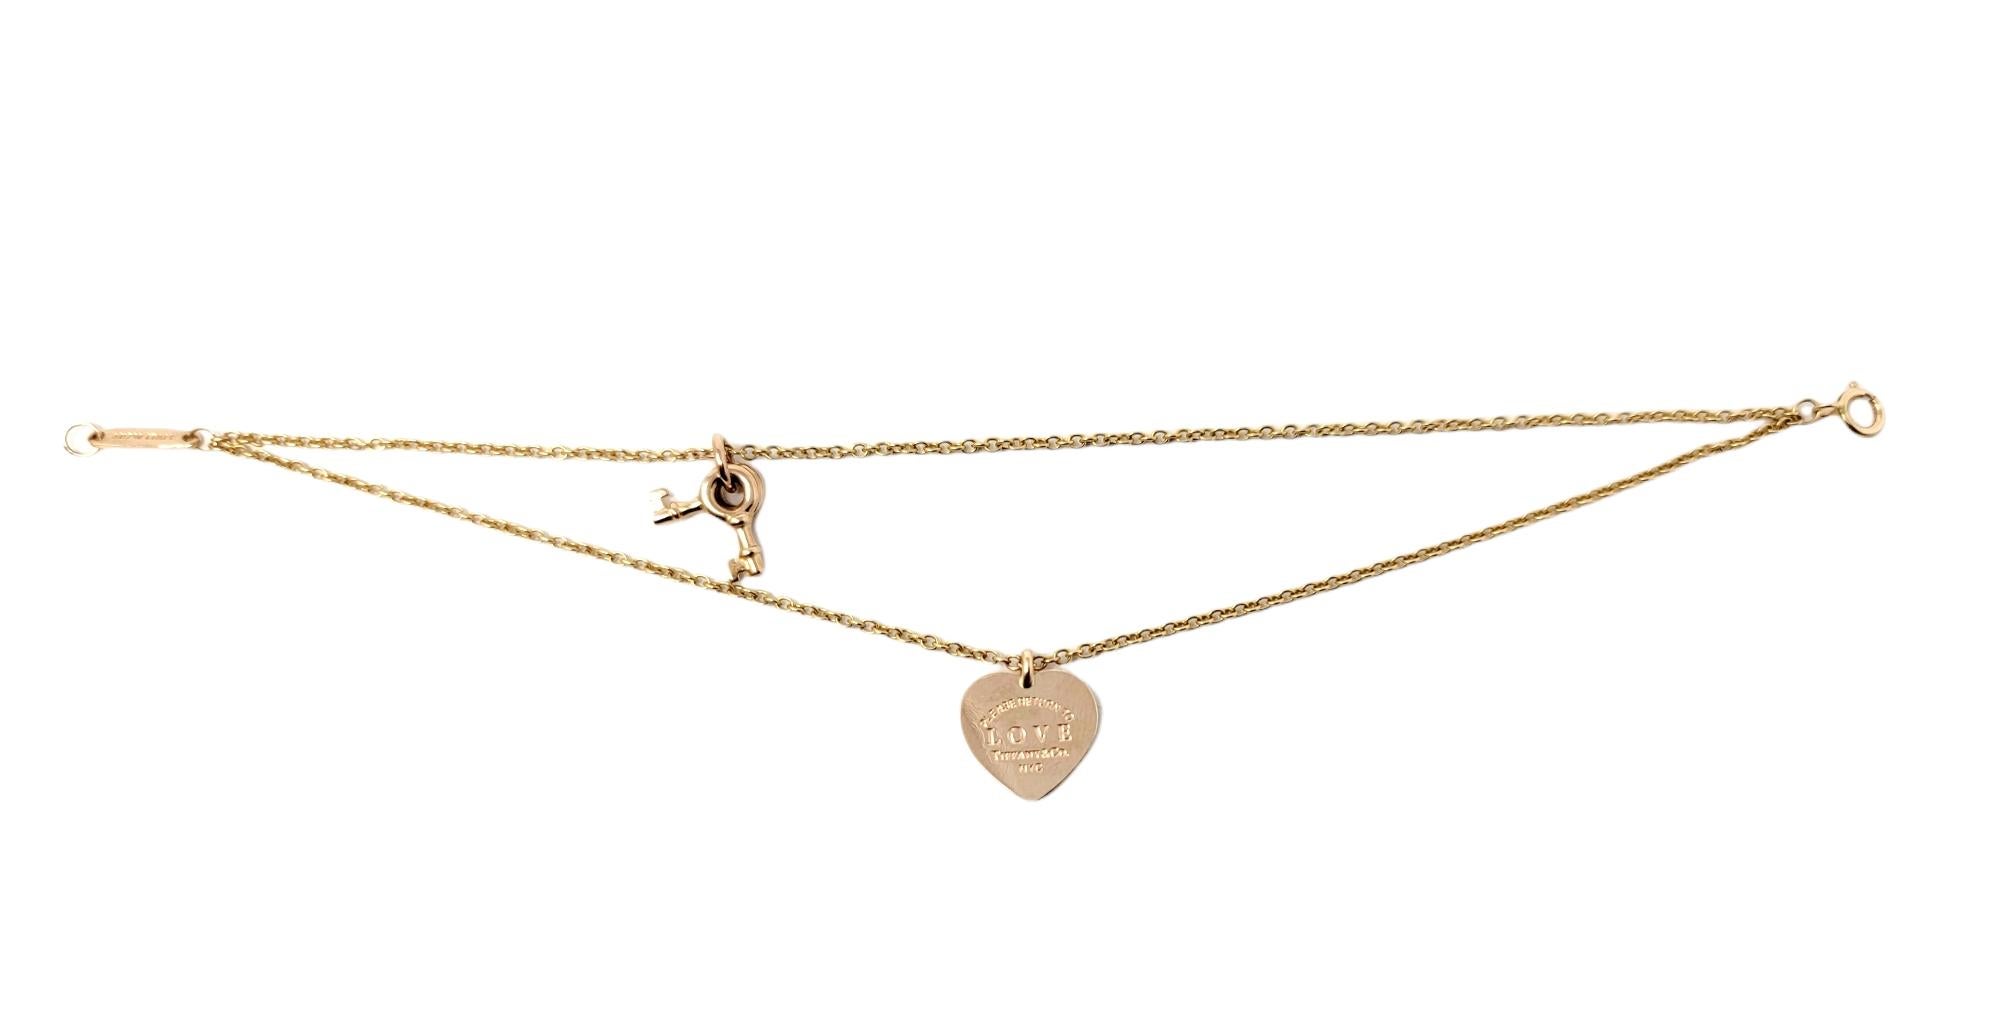 You will love this dainty and feminine double chain bracelet by Tiffany & Co.. Featuring a heart tag and 2 skeleton keys, this delicate 18 karat rose gold beauty is simple yet stunning. 

Metal: 18K Rose Gold
Weight: 5.4 grams
Bracelet Length: